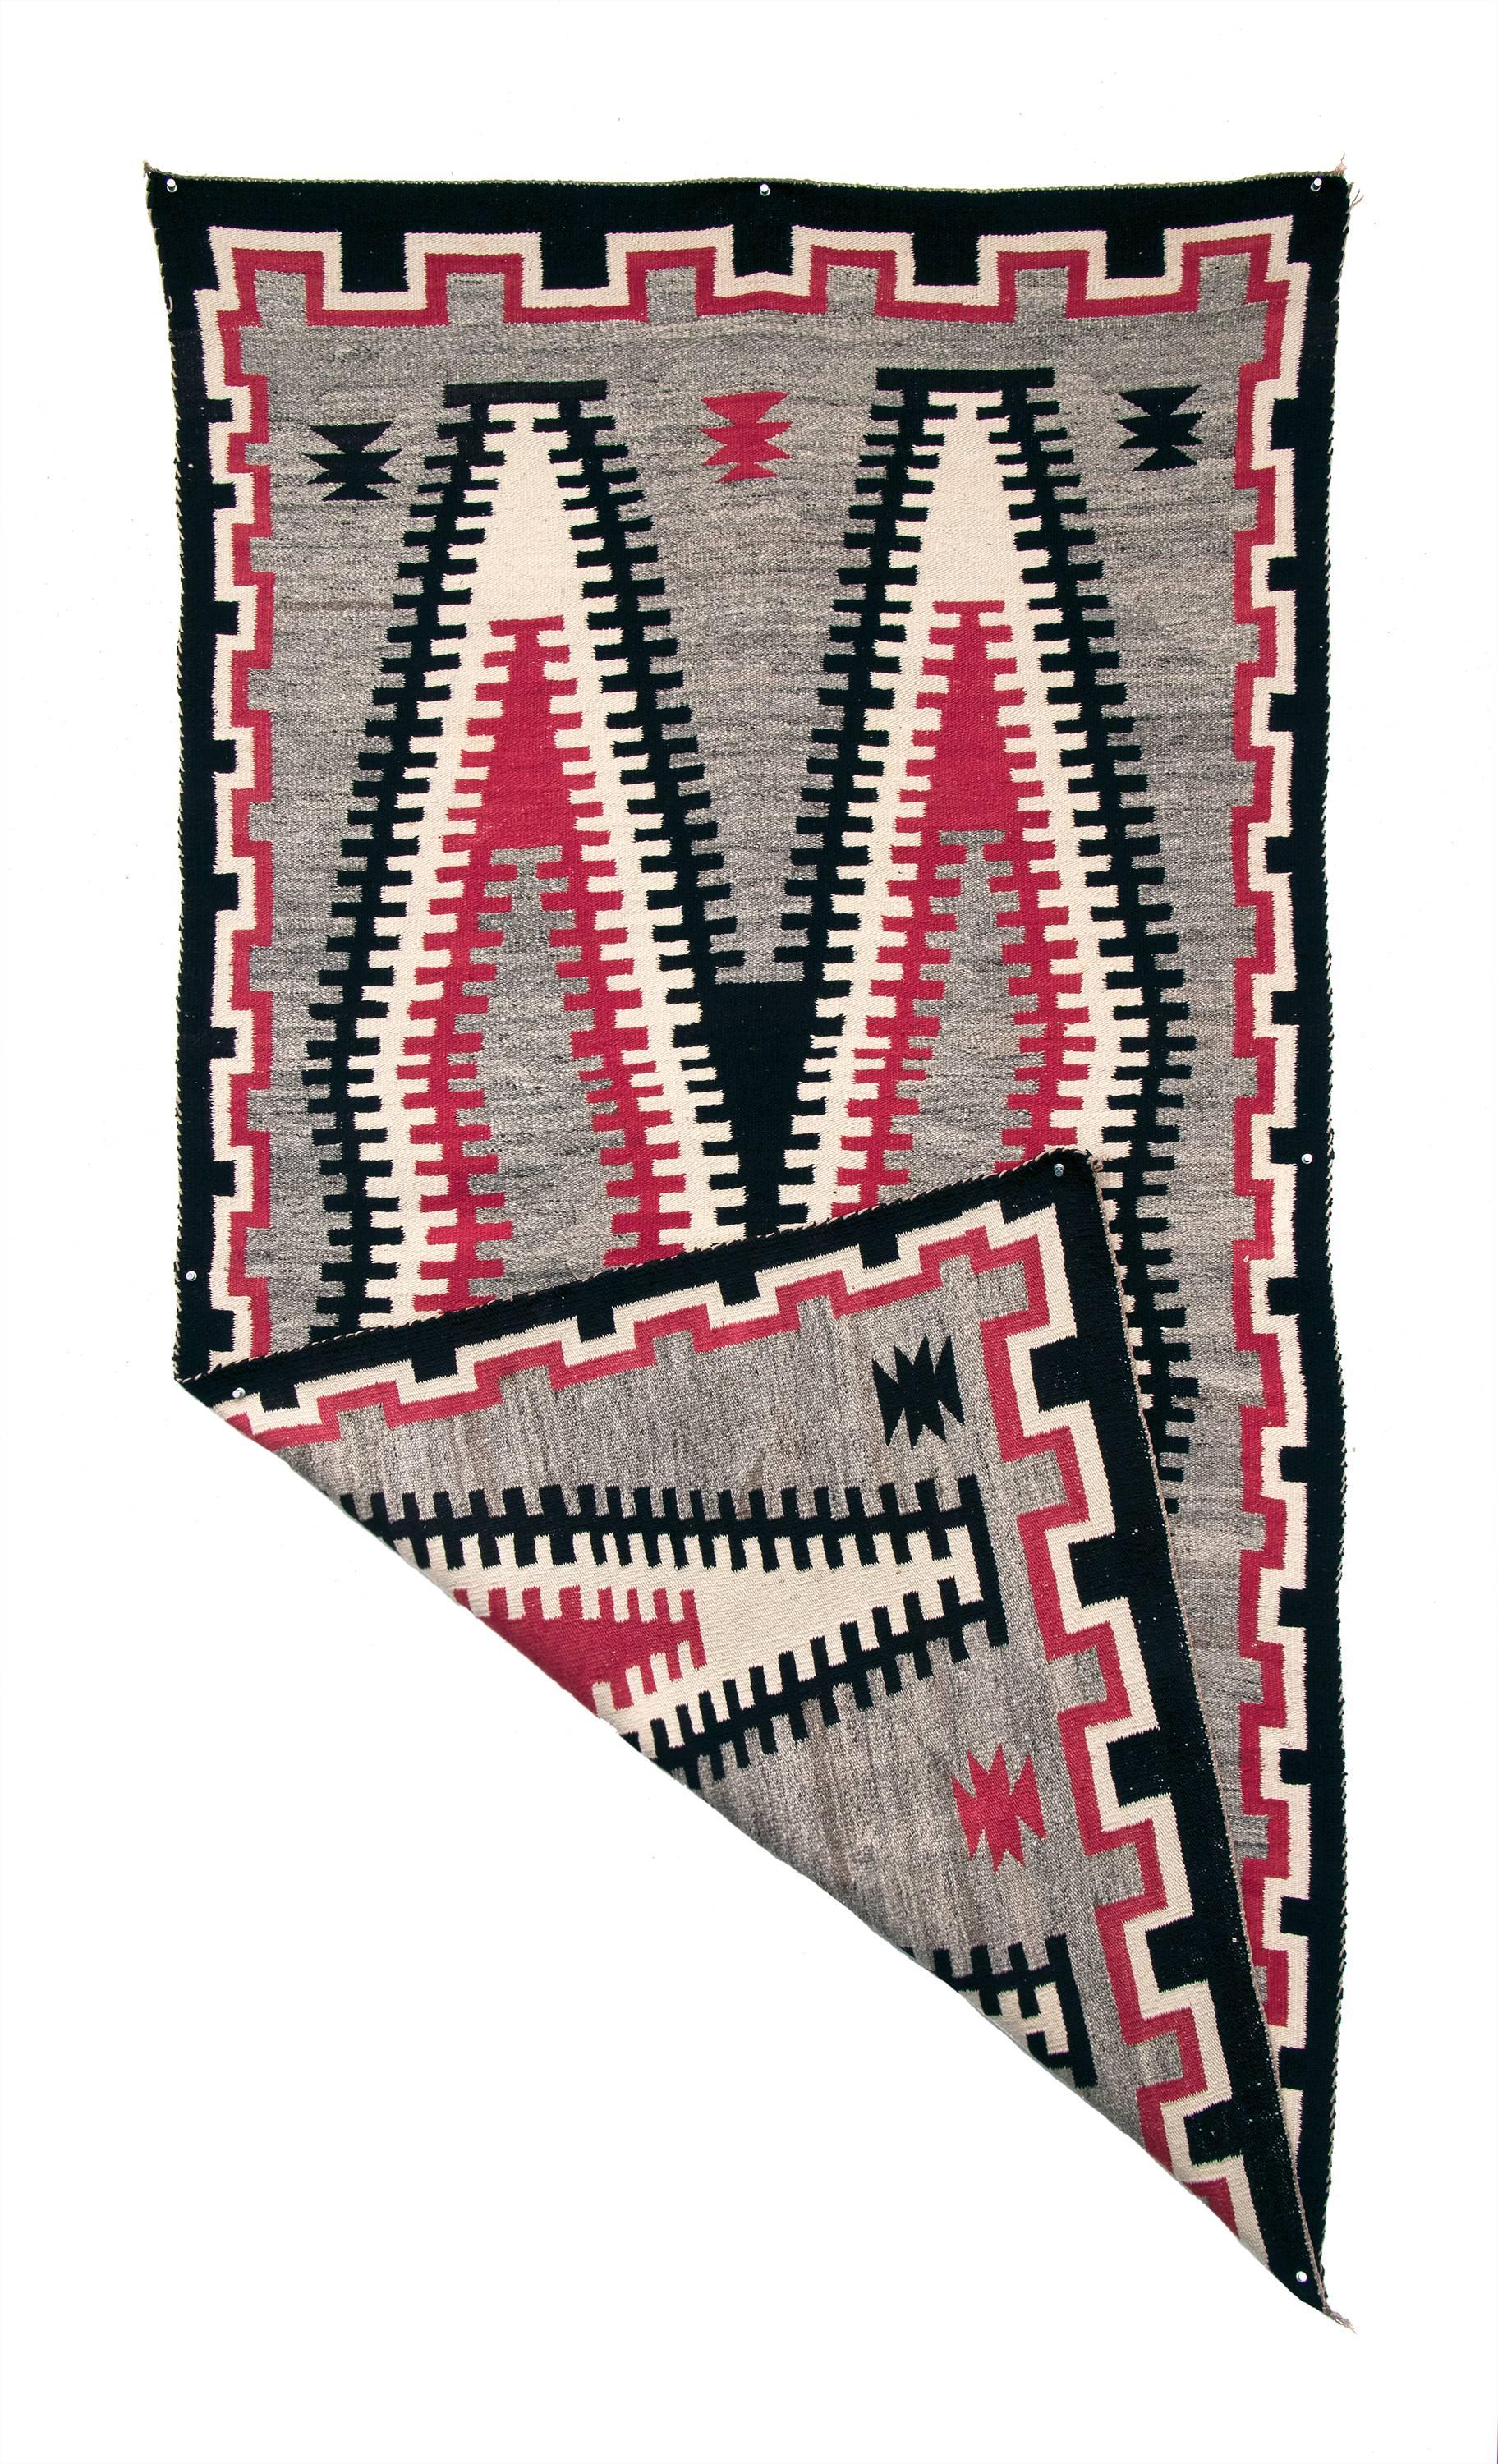 Navajo rug circa 1930. Finely woven from native handspun wool in natural fleece colors of black, ivory and gray with aniline dyed red. Design elements include a stepped border and serrated double diamond center with a grey field.

This textile is